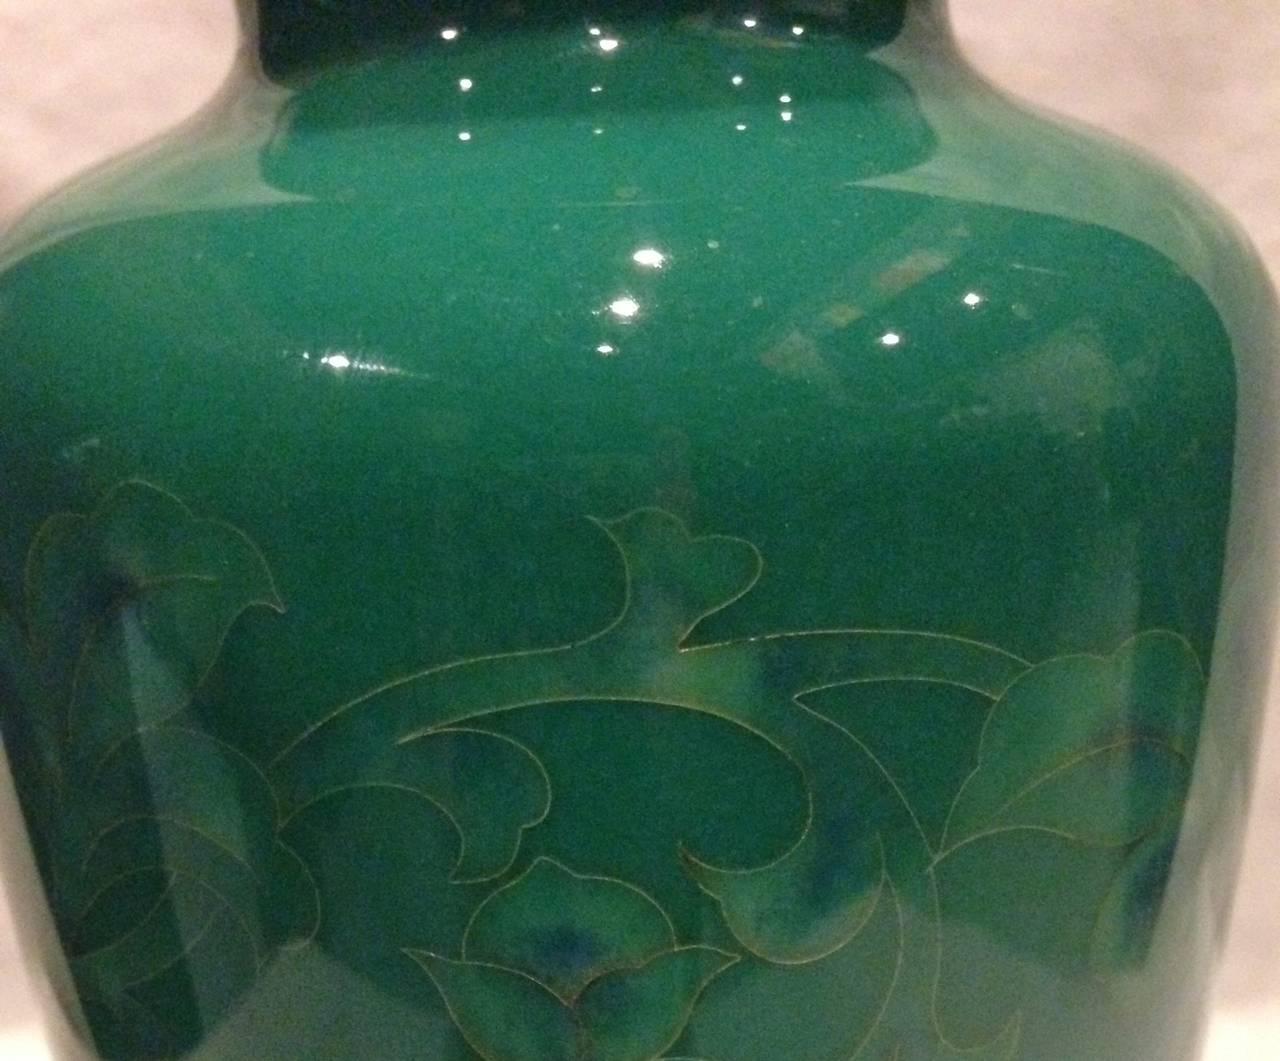 Yukio Tamura's work is often found in the Japanese royalties' imperial collections. This stunning vase features peonies in a continuous pattern. Very subtle and beautiful, the refined cloisonne work and use of celadon enamel demonstrate the artist's